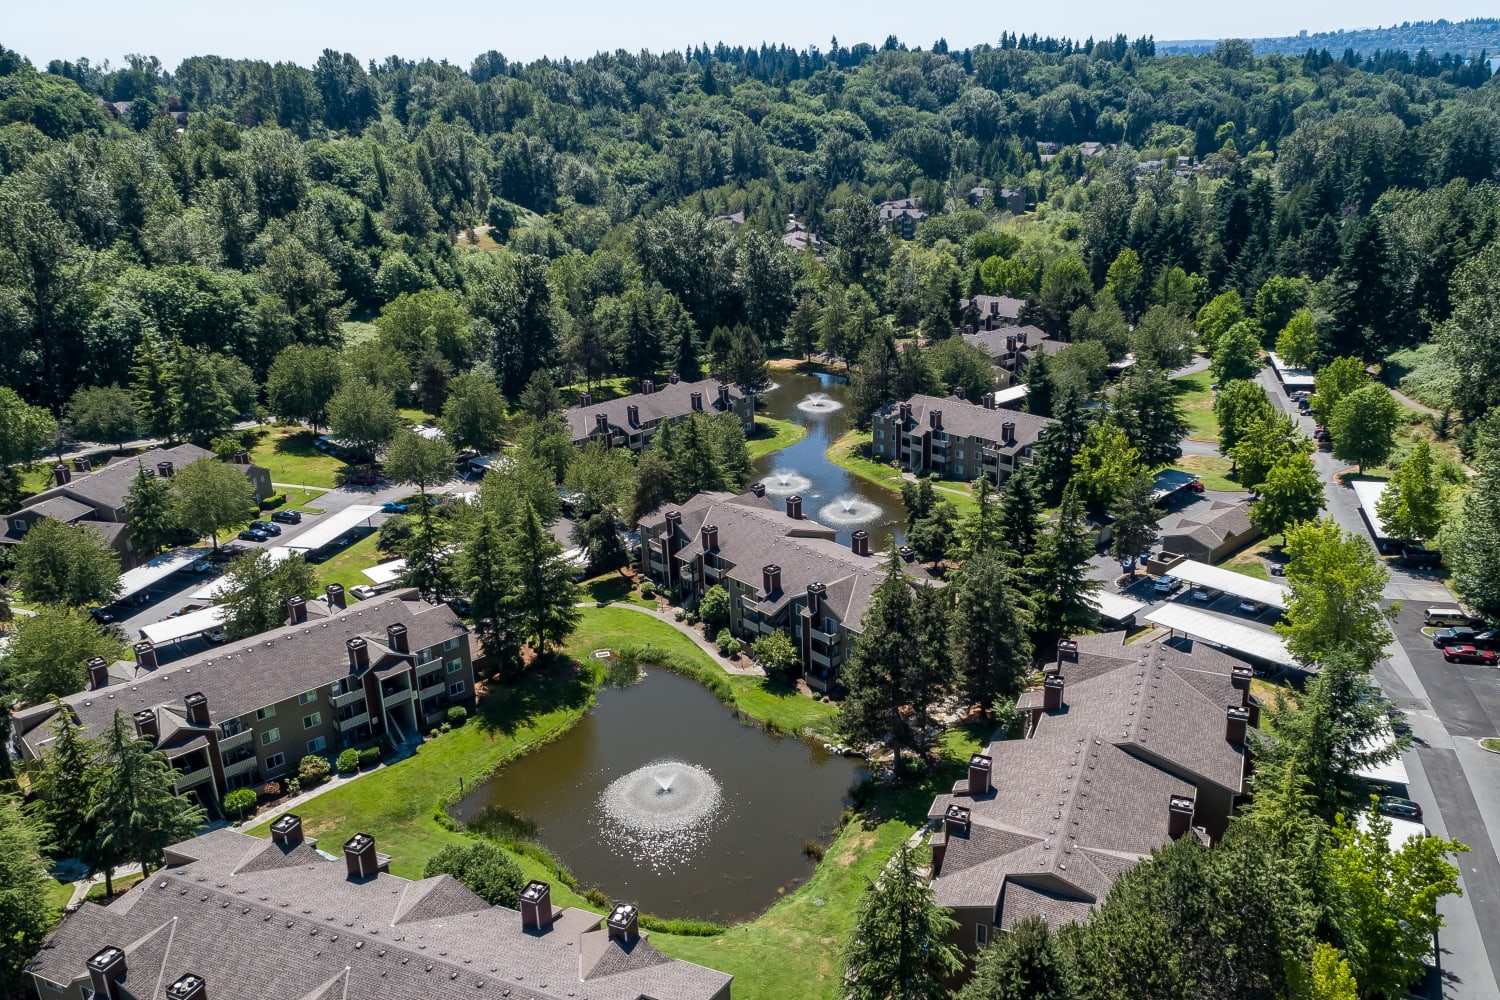 Ariel image of community at The Preserve at Forbes Creek in Kirkland, Washington